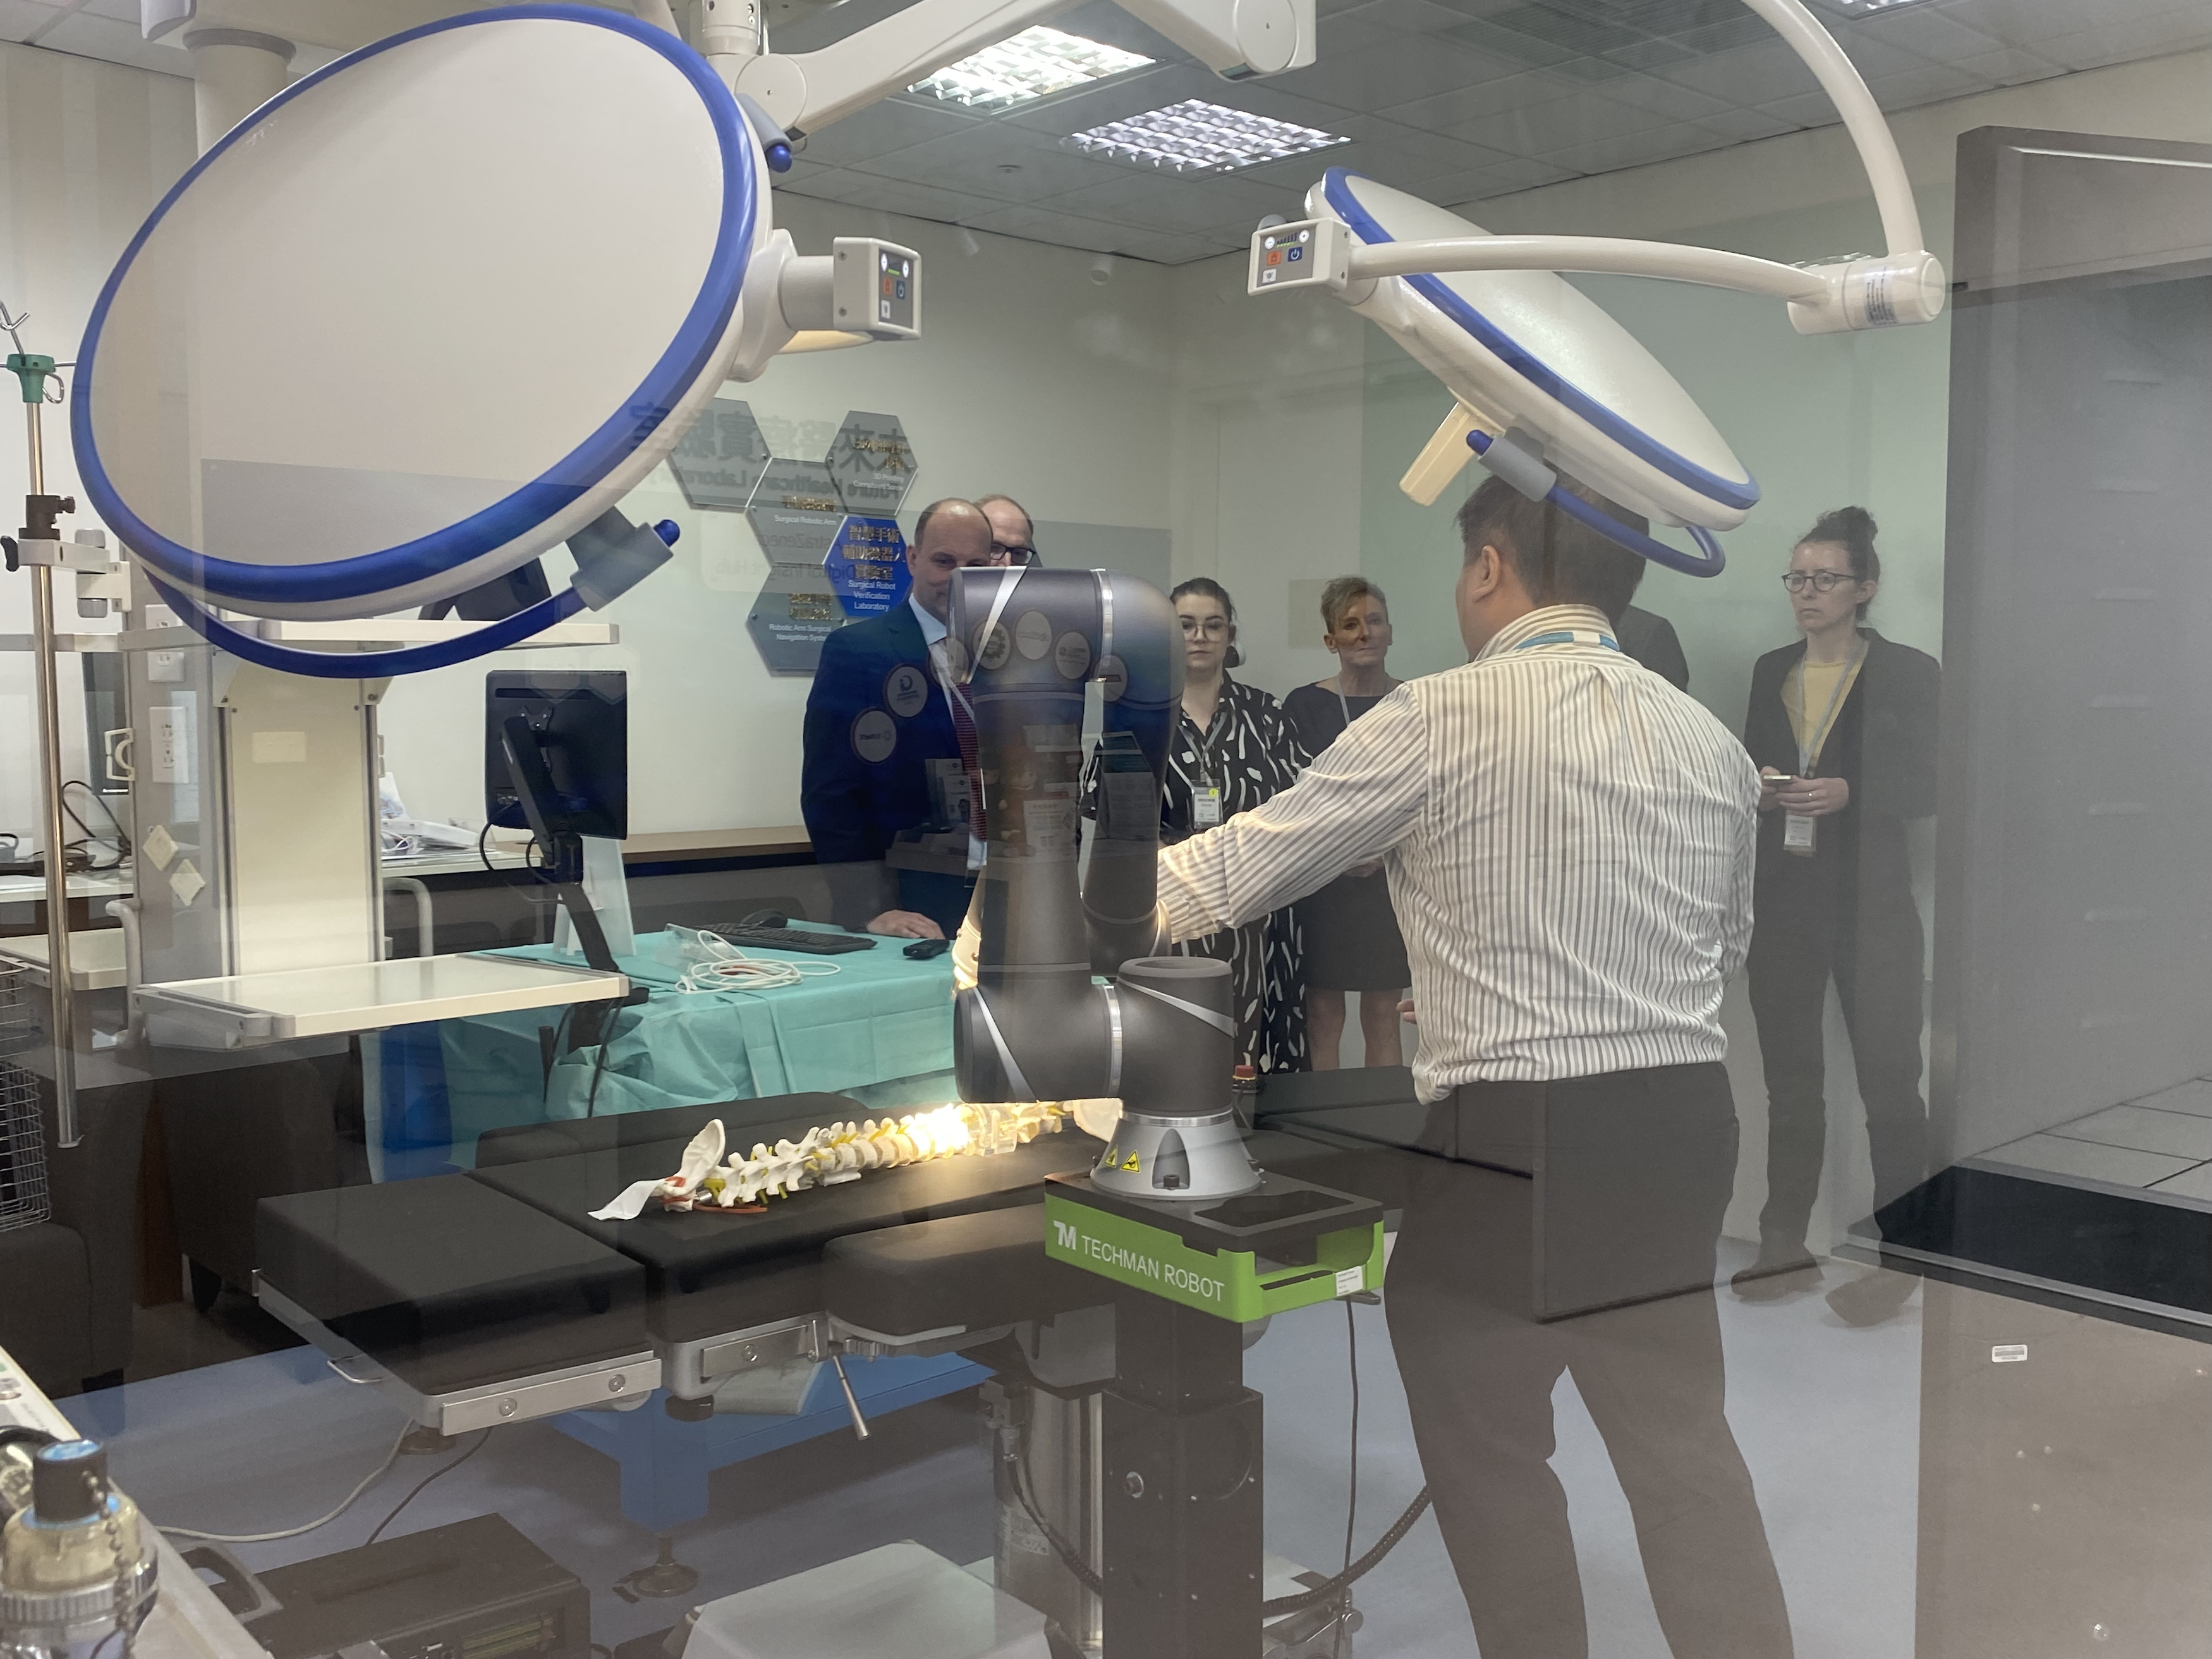 group crowded around a surgical robot